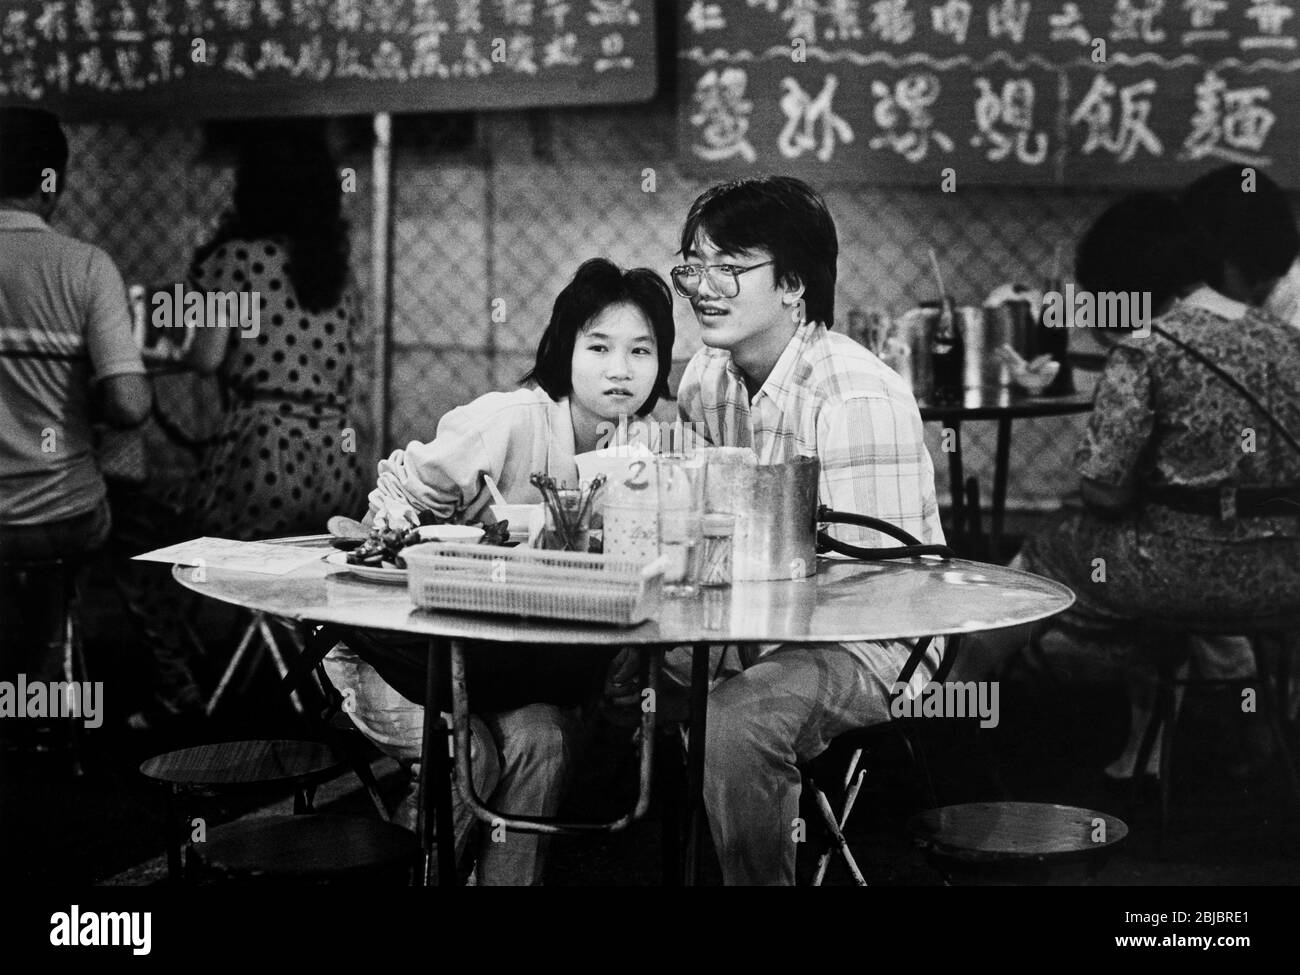 Hong Kong October 1986 A young couple wait for their meal at The Poor Man’s Nightclub in Mong Kok. The picture is is part of a collection of photographs taken in Hong Kong between September and November, 1986. They represent a snapshot of Daily Life in the Crown Colony eleven years before sovereignty was transferred back to mainland China. Photograph by Howard Walker / Alamy. Stock Photo